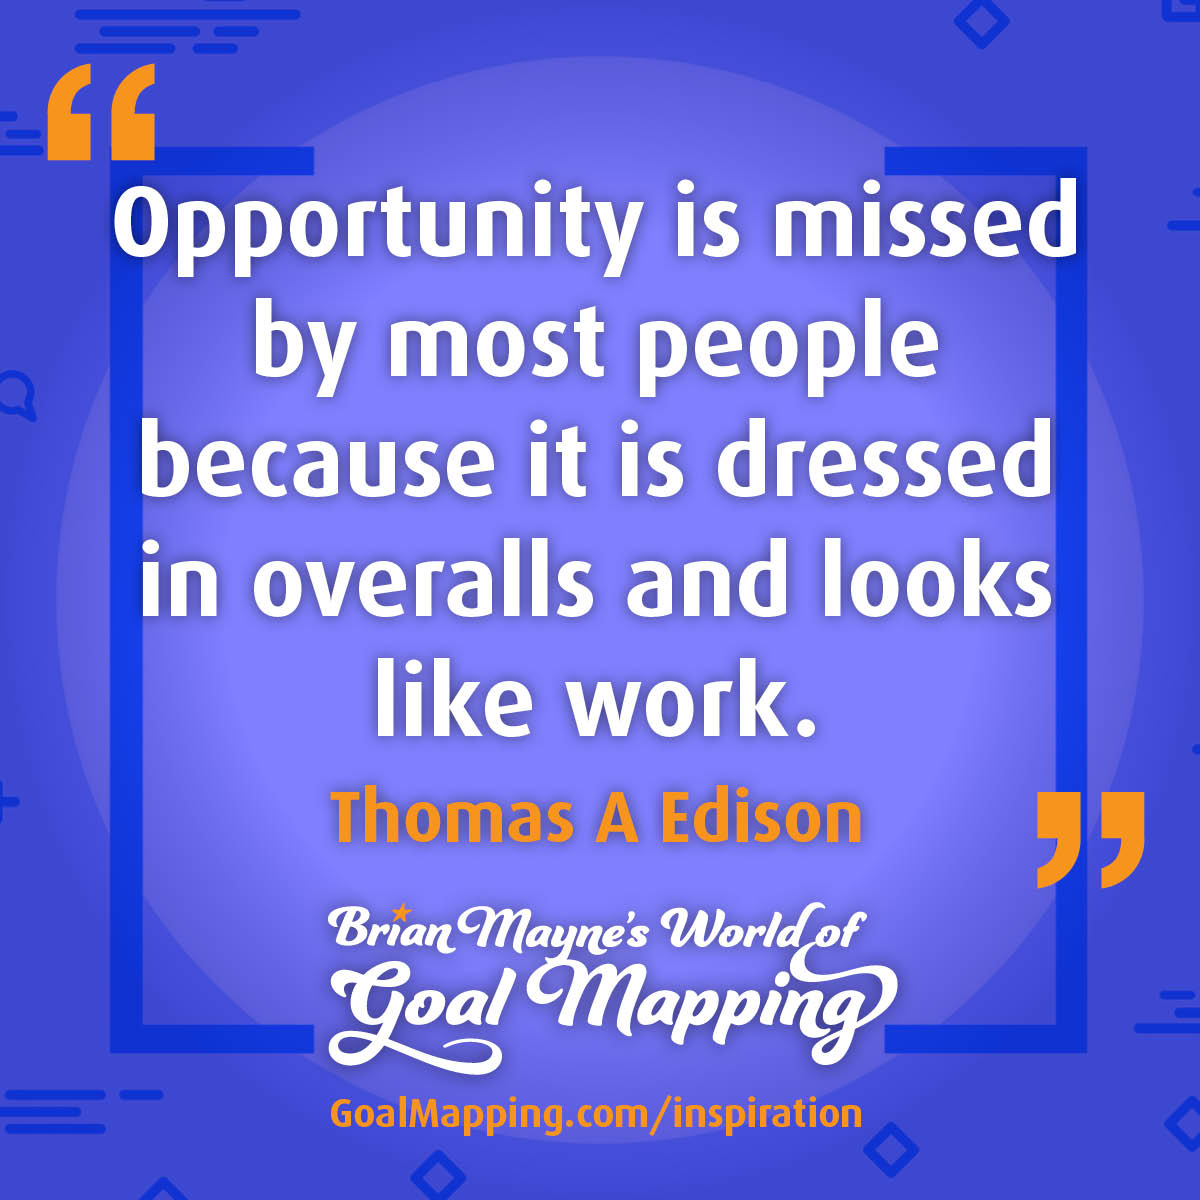 "Opportunity is missed by most people because it is dressed in overalls and looks like work." Thomas A Edison